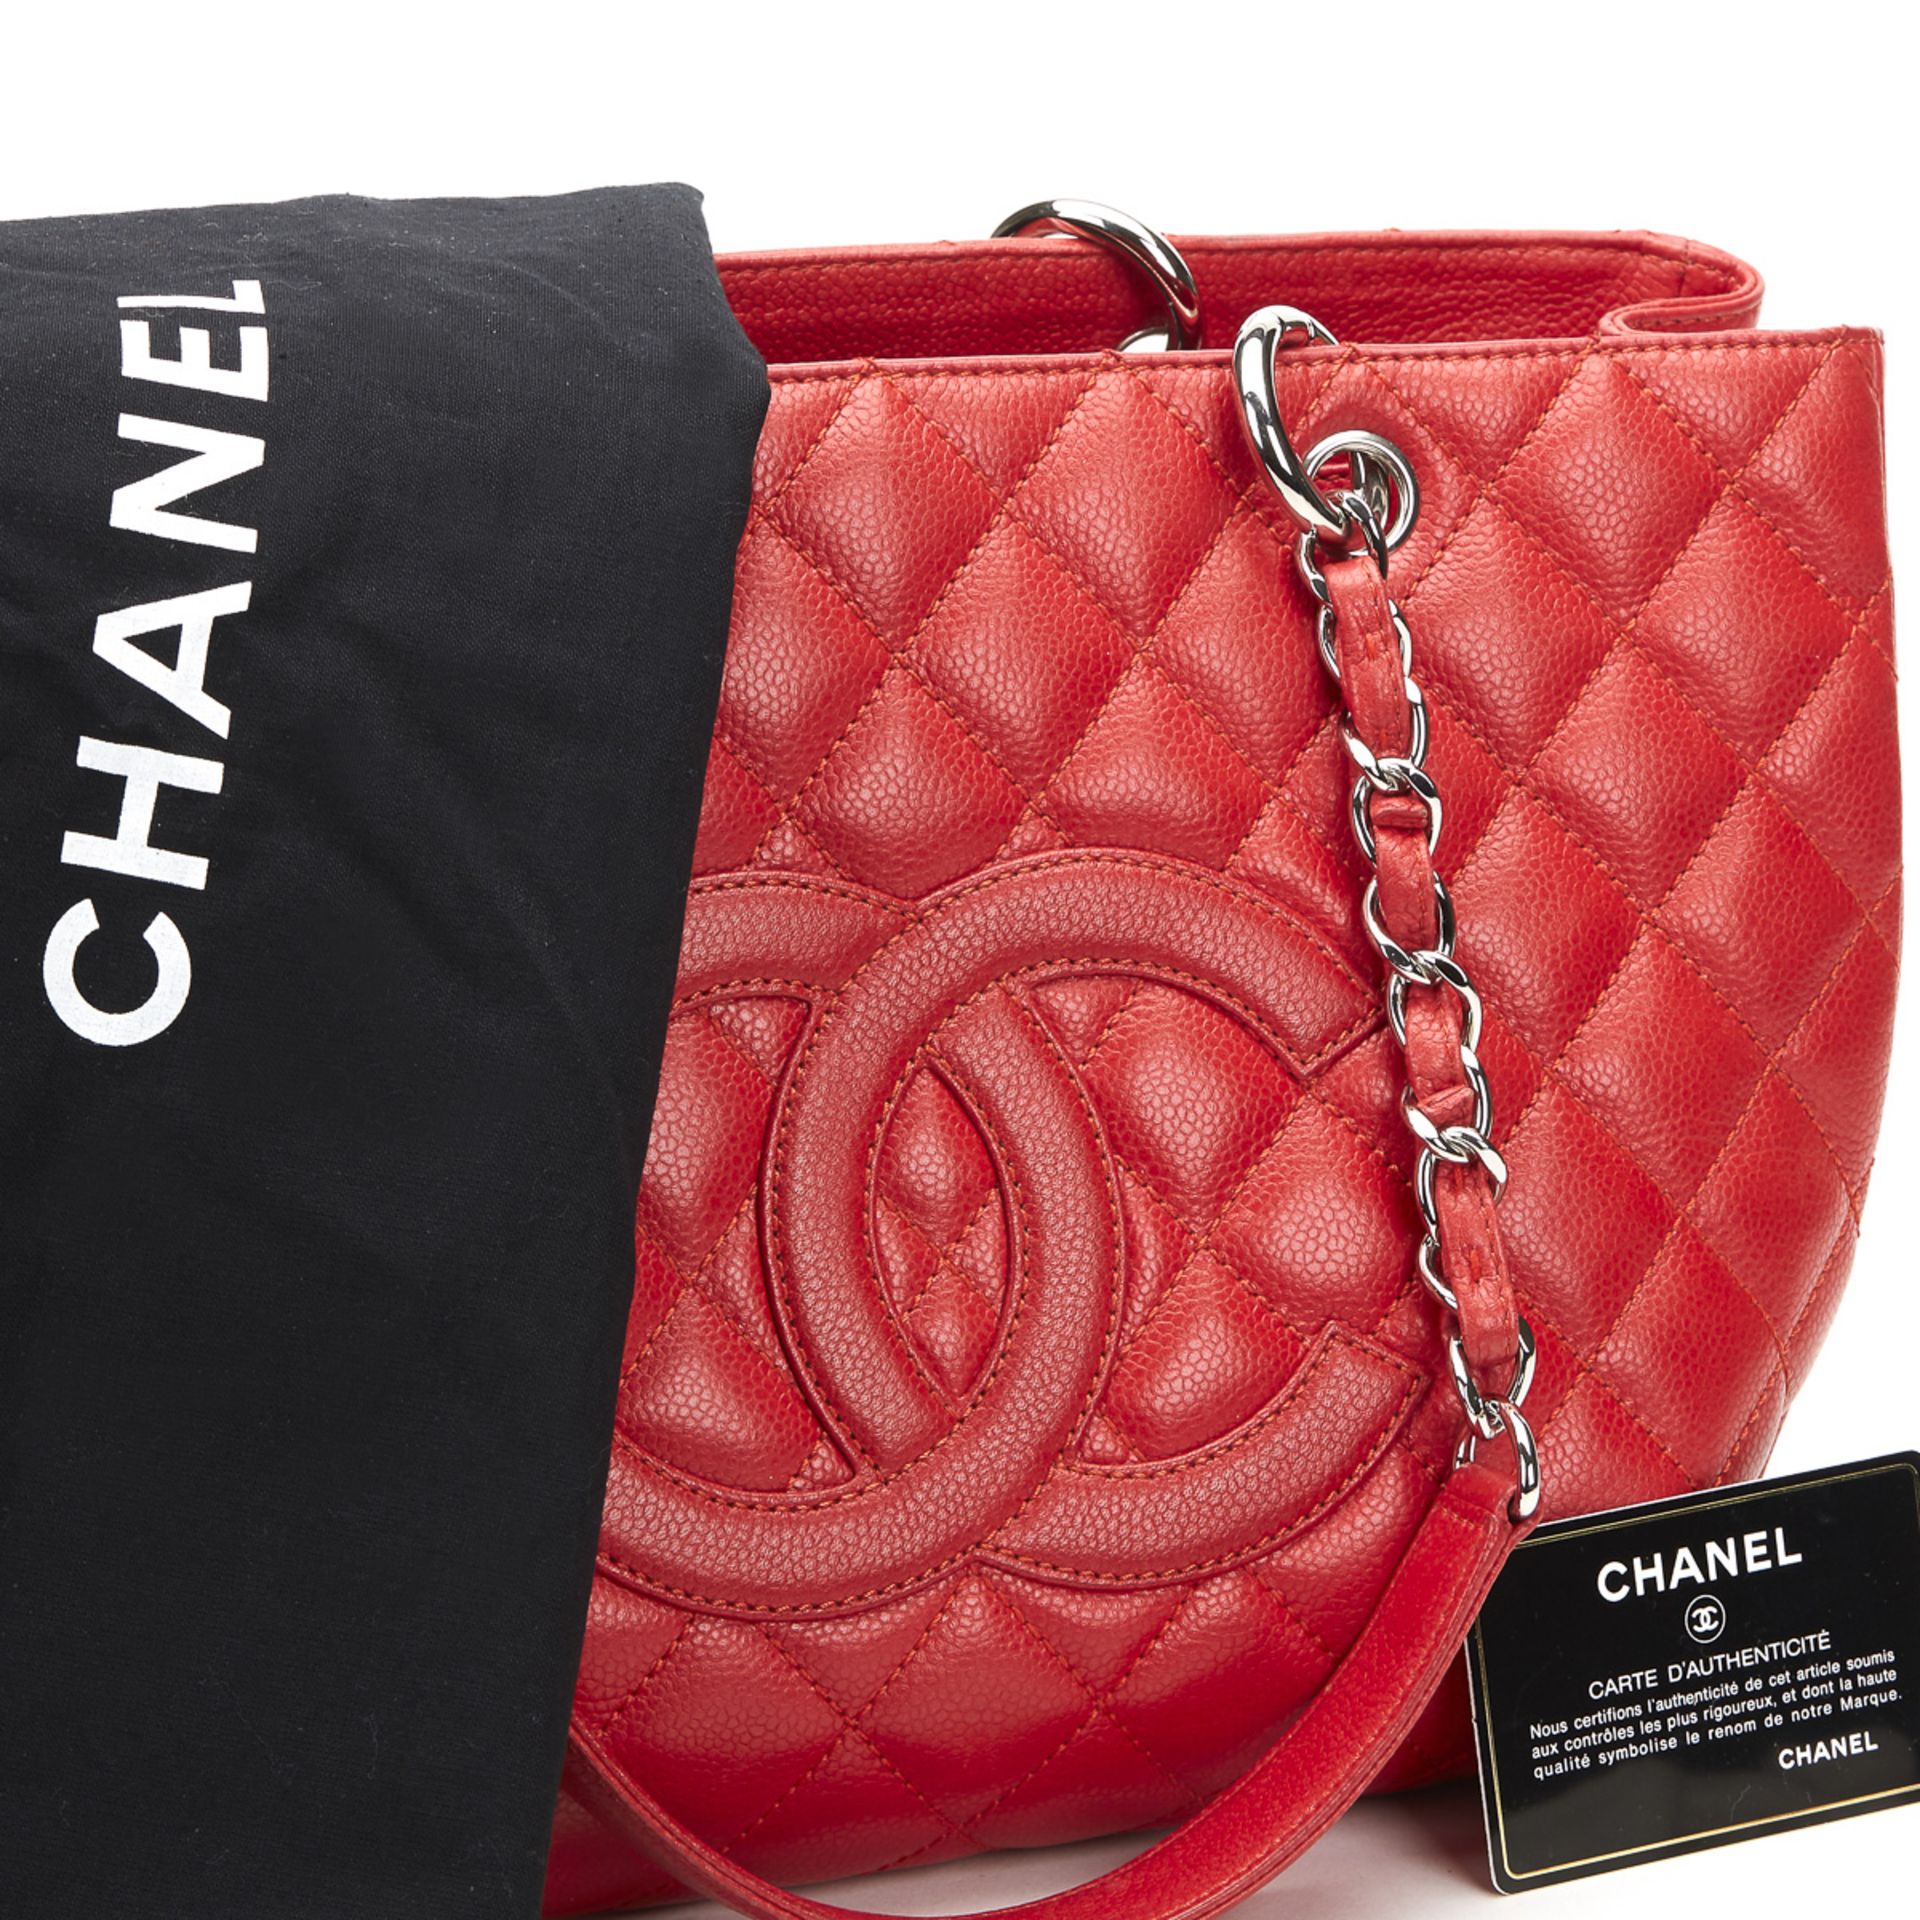 CHANEL Grand Shopping Tote - Image 9 of 10